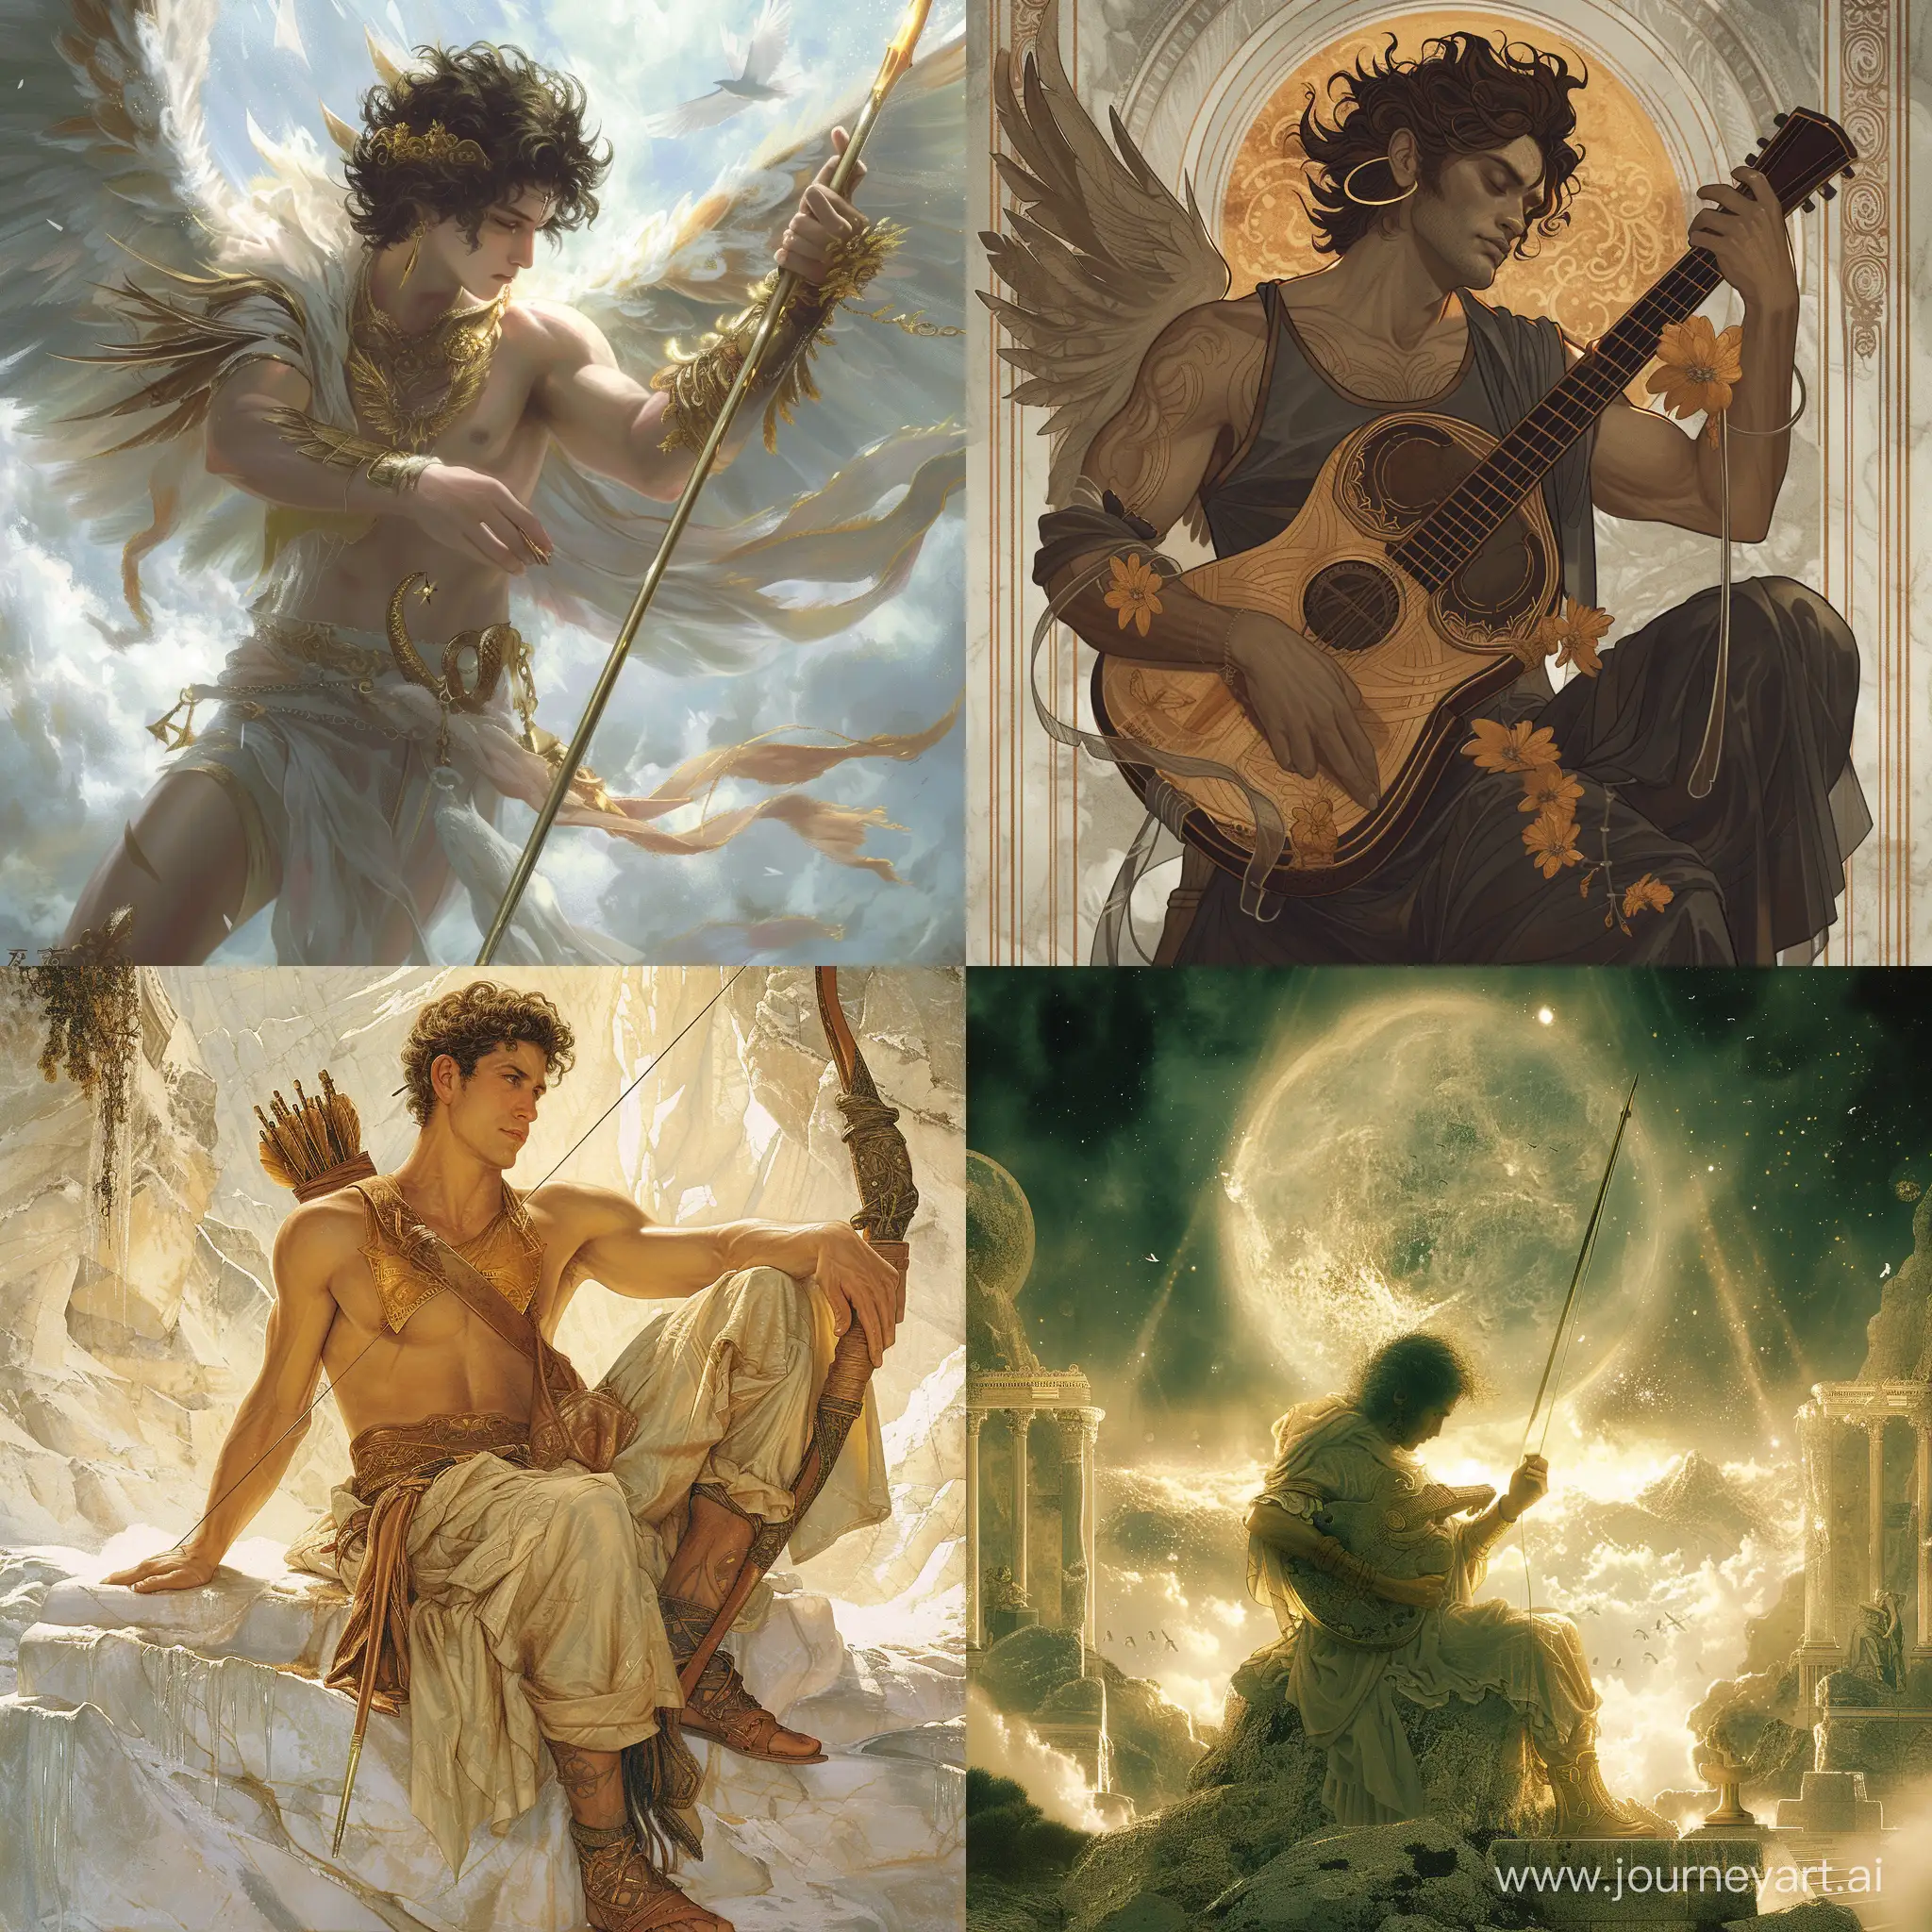 Once upon a time, in the magical realm of Mount Olympus, there lived a god named Tuaron. His origins were as mysterious as the melodies he would later create. Tuaron was the son of the goddess Aeos and the mighty god of war, Ares. Born of a fleeting liaison, his mother bestowed upon him eternal youth and refinement, while his father gifted him an unrestrained and strong character.